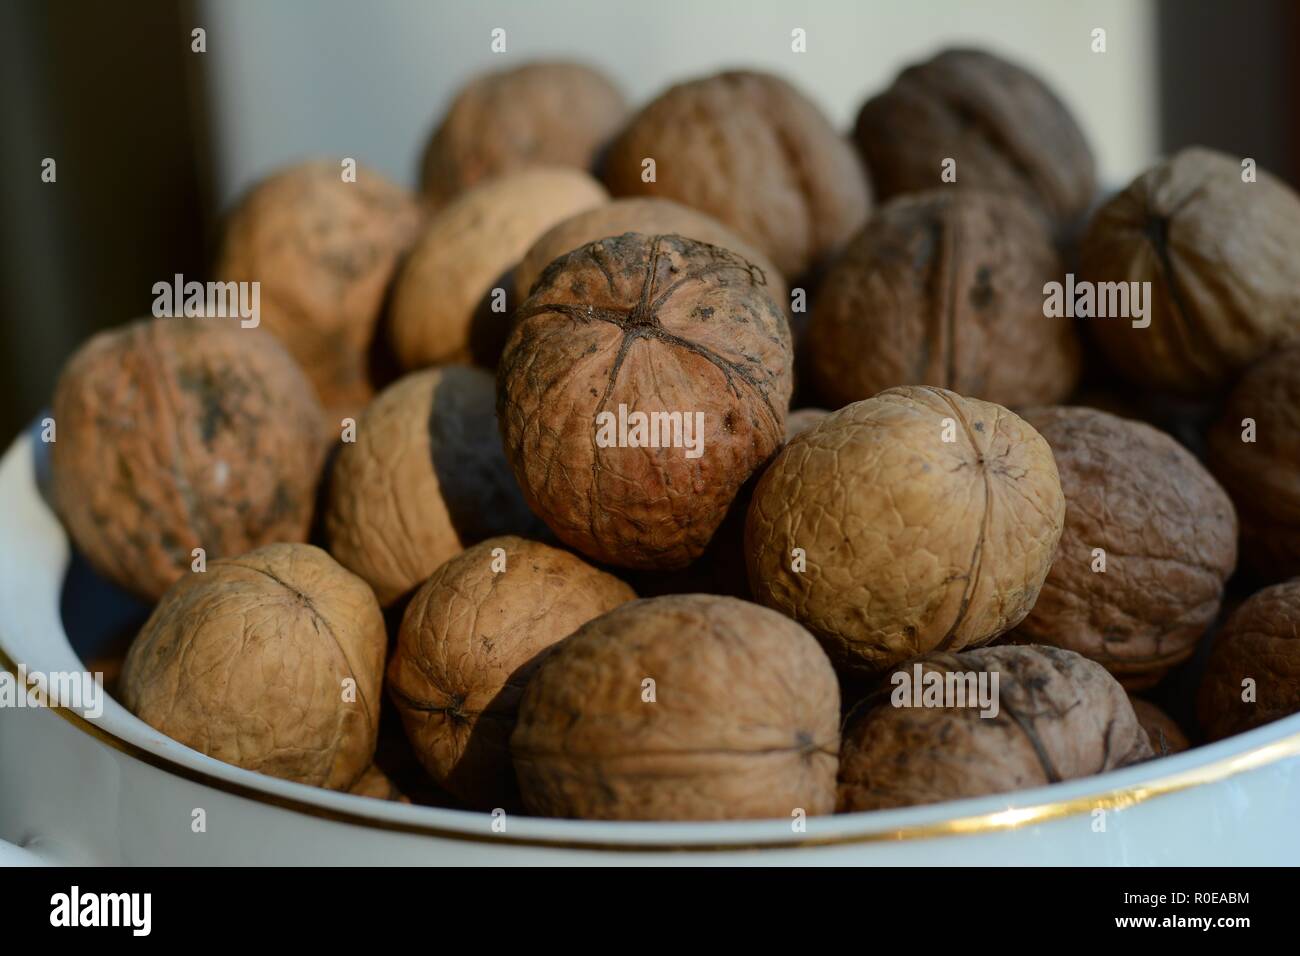 Unshelled walnuts in a bowl Stock Photo